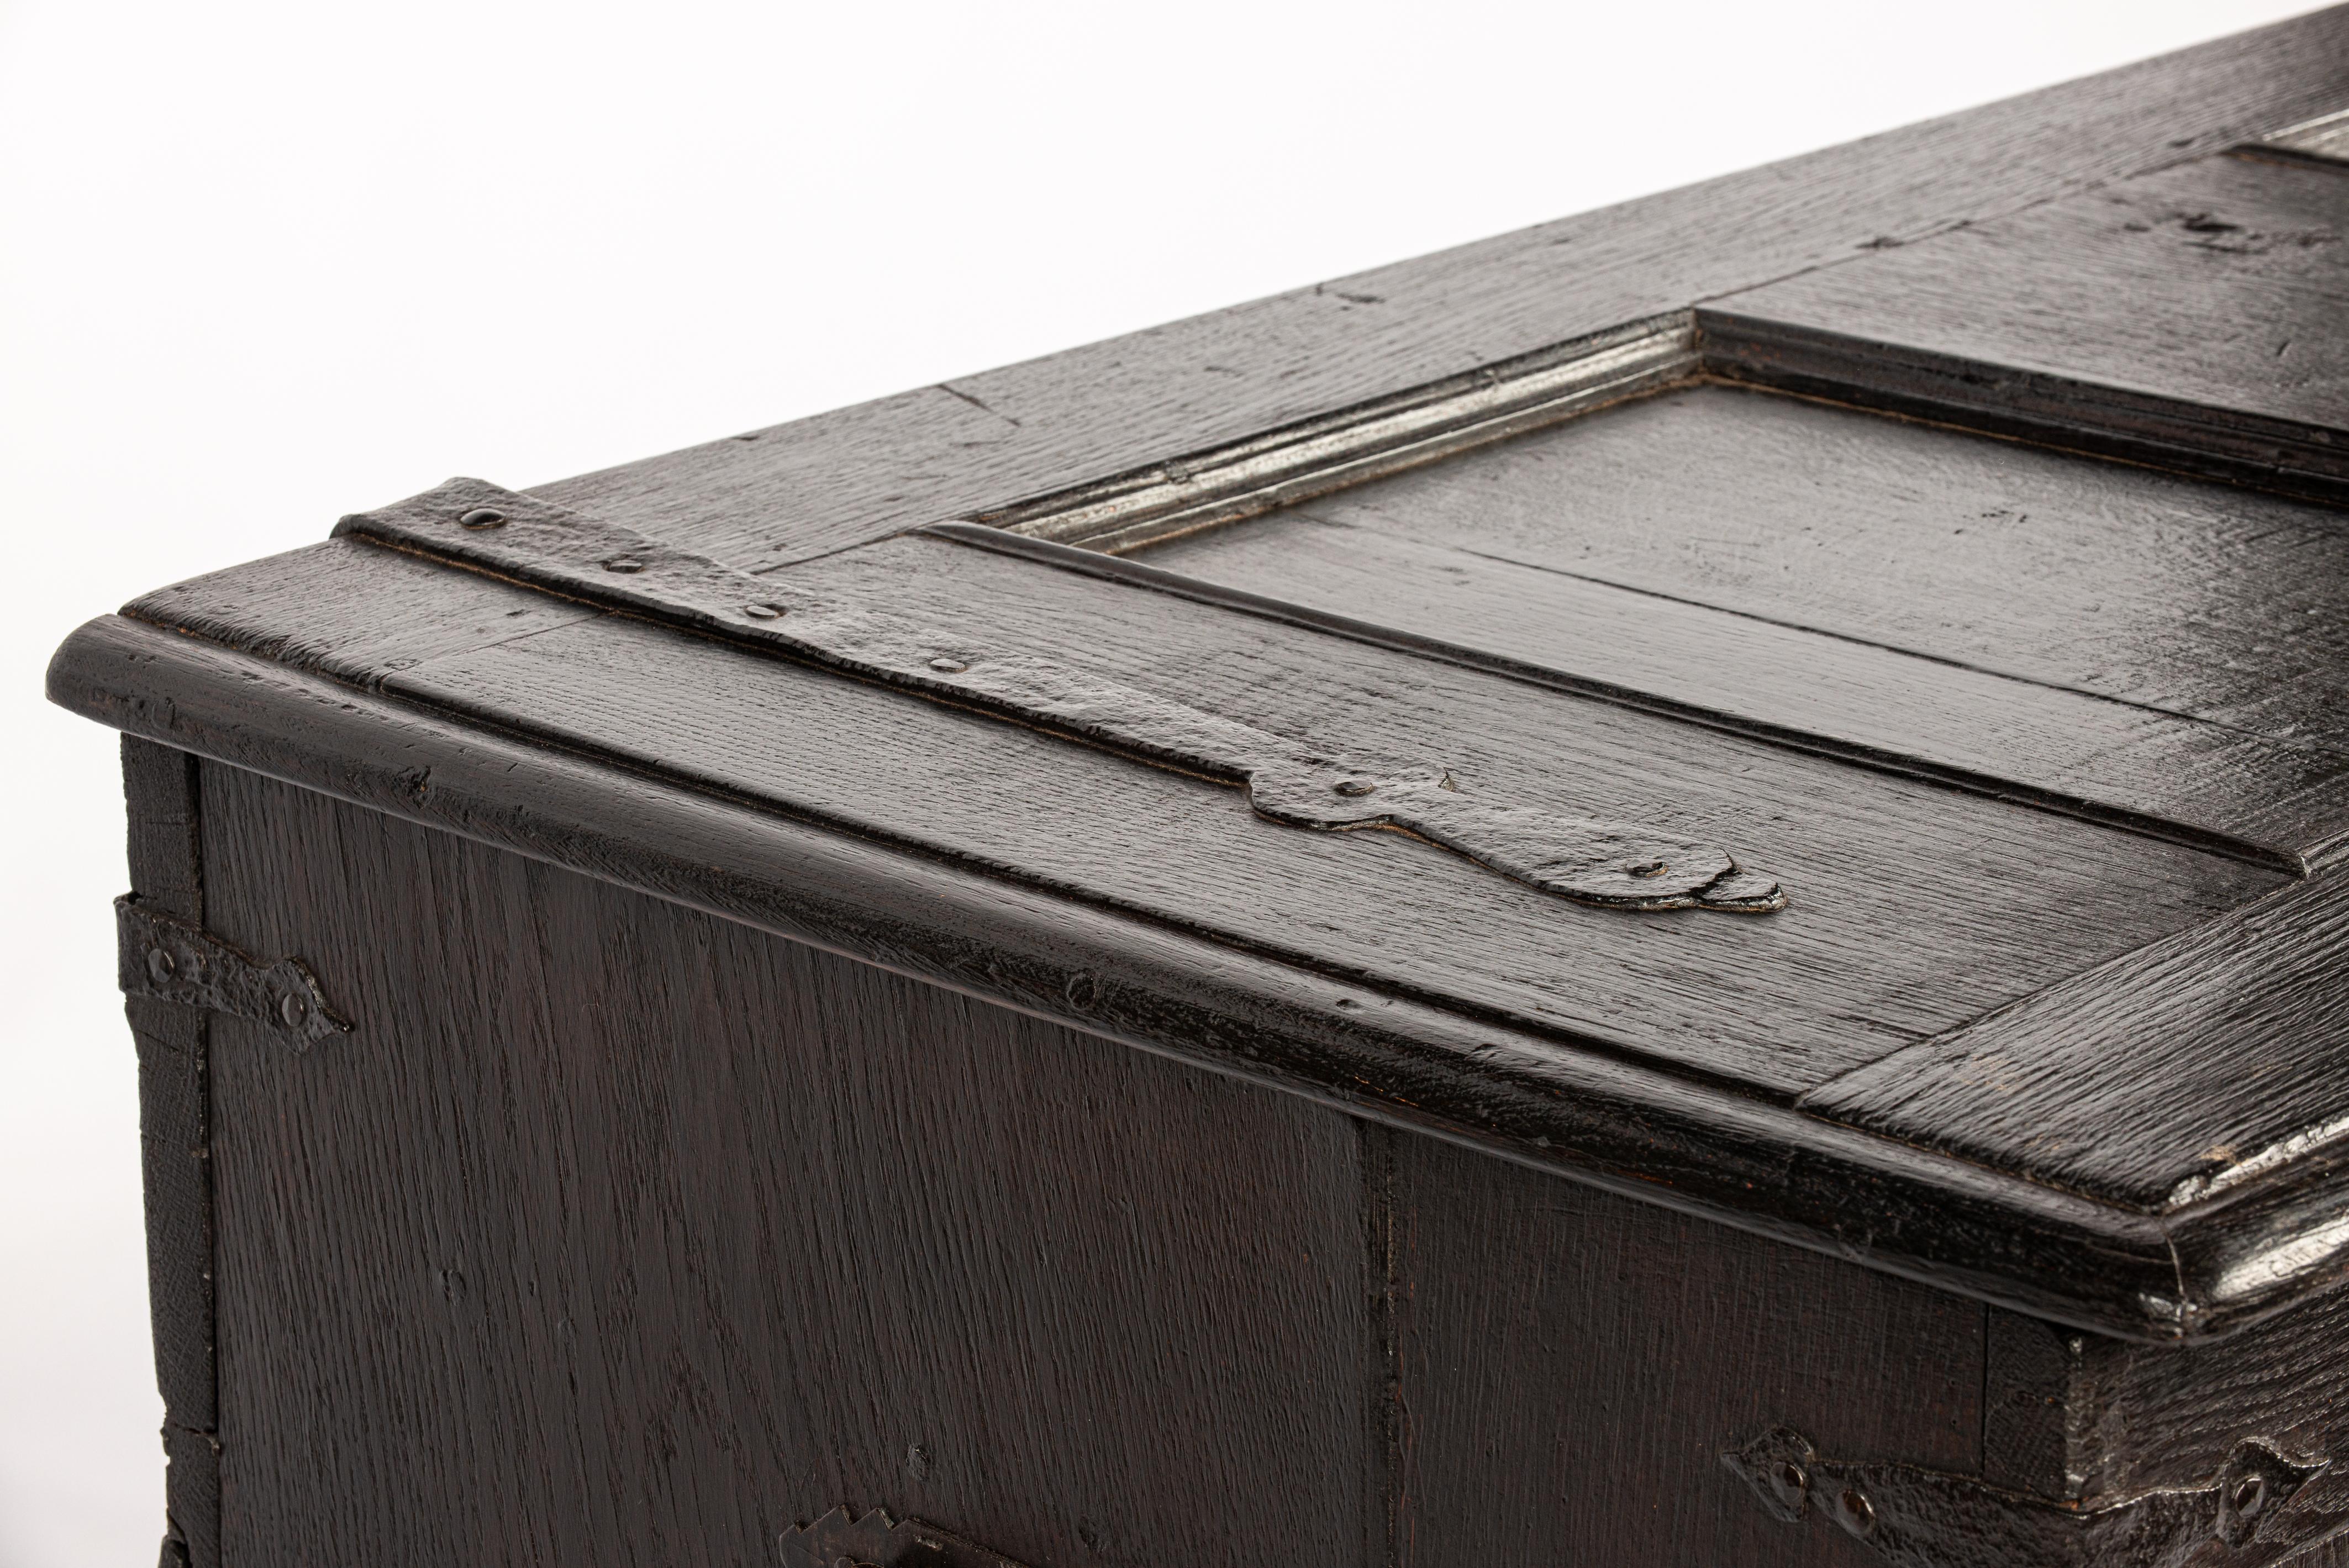  Antique late 18th century German Solid black Oak panelled trunk or coffer For Sale 9